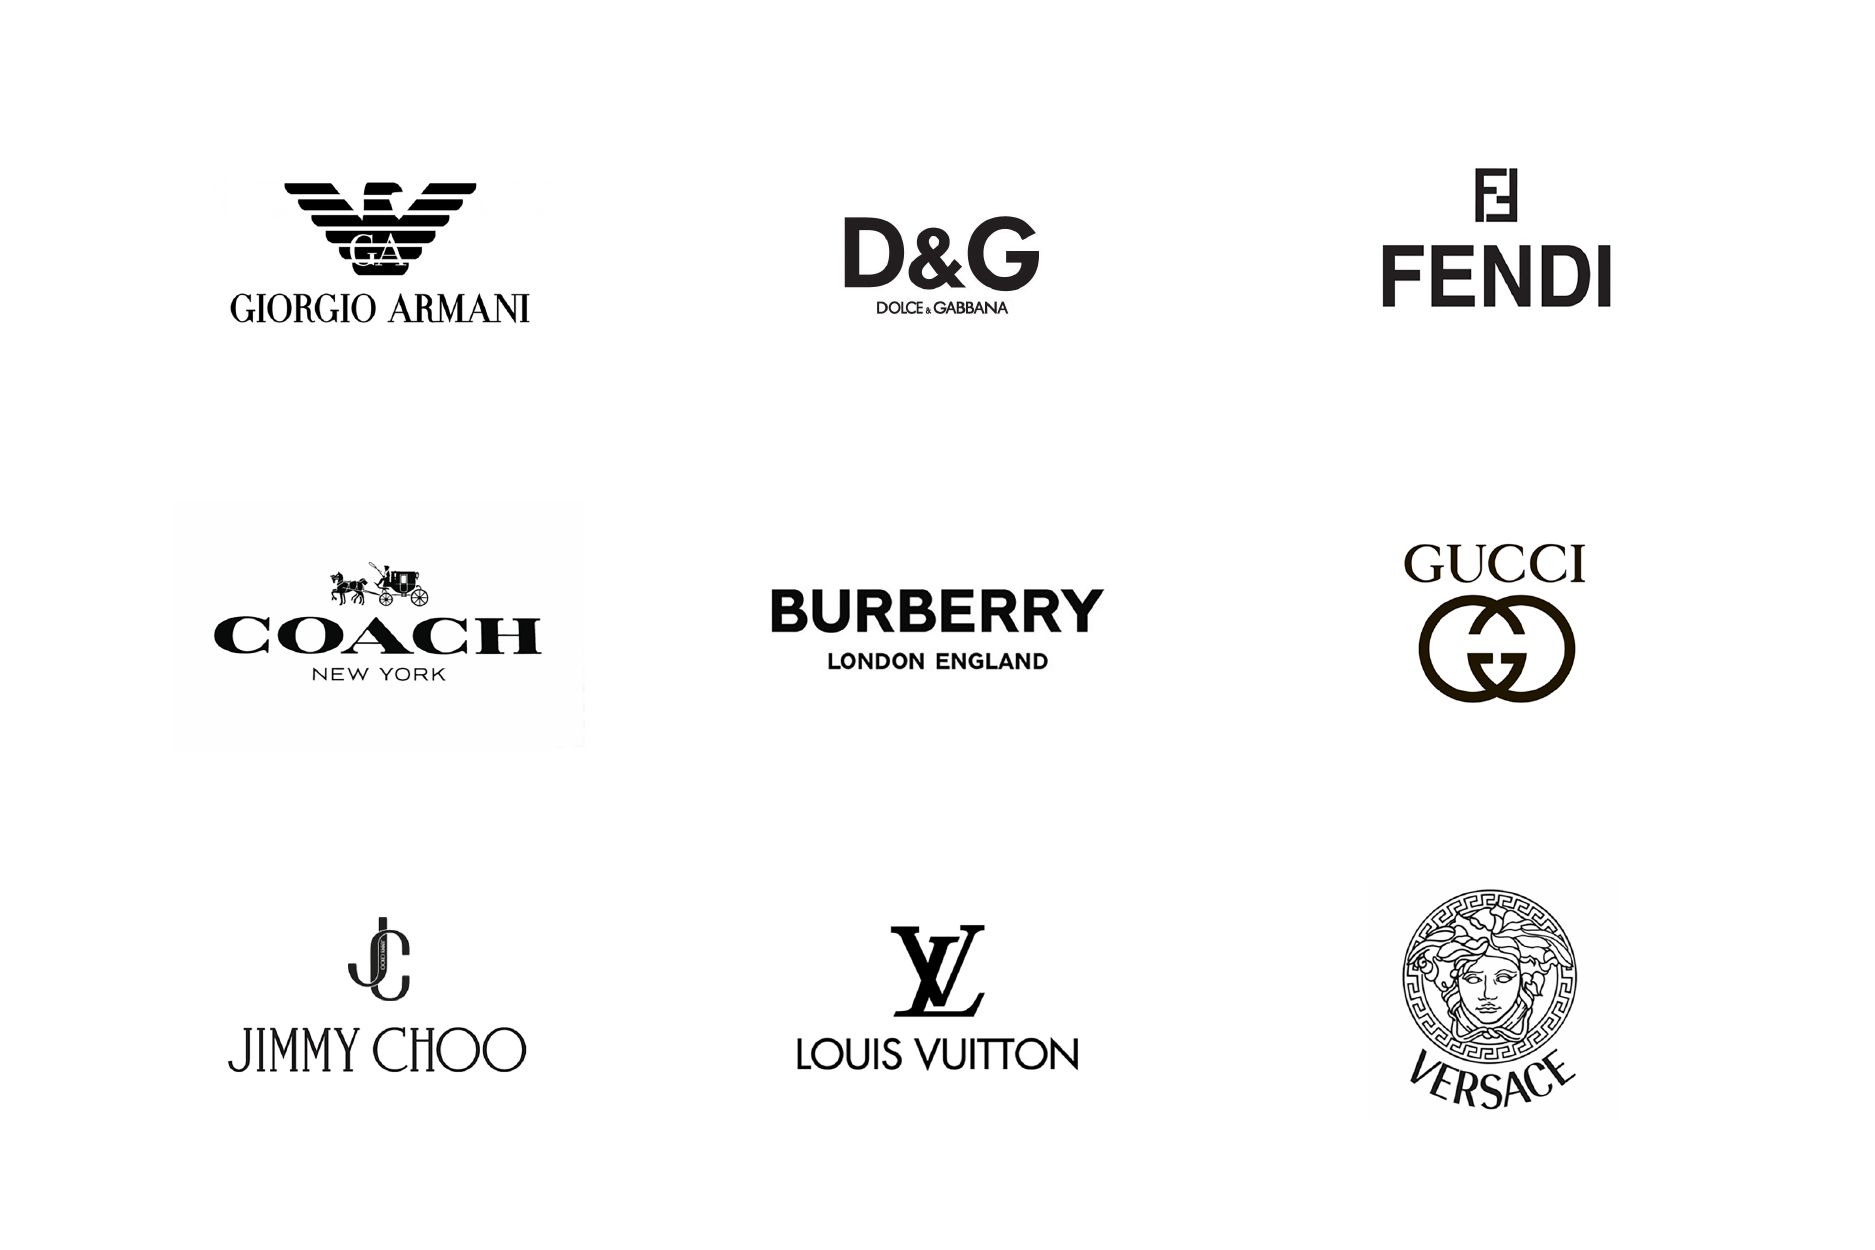 brands similar to gucci